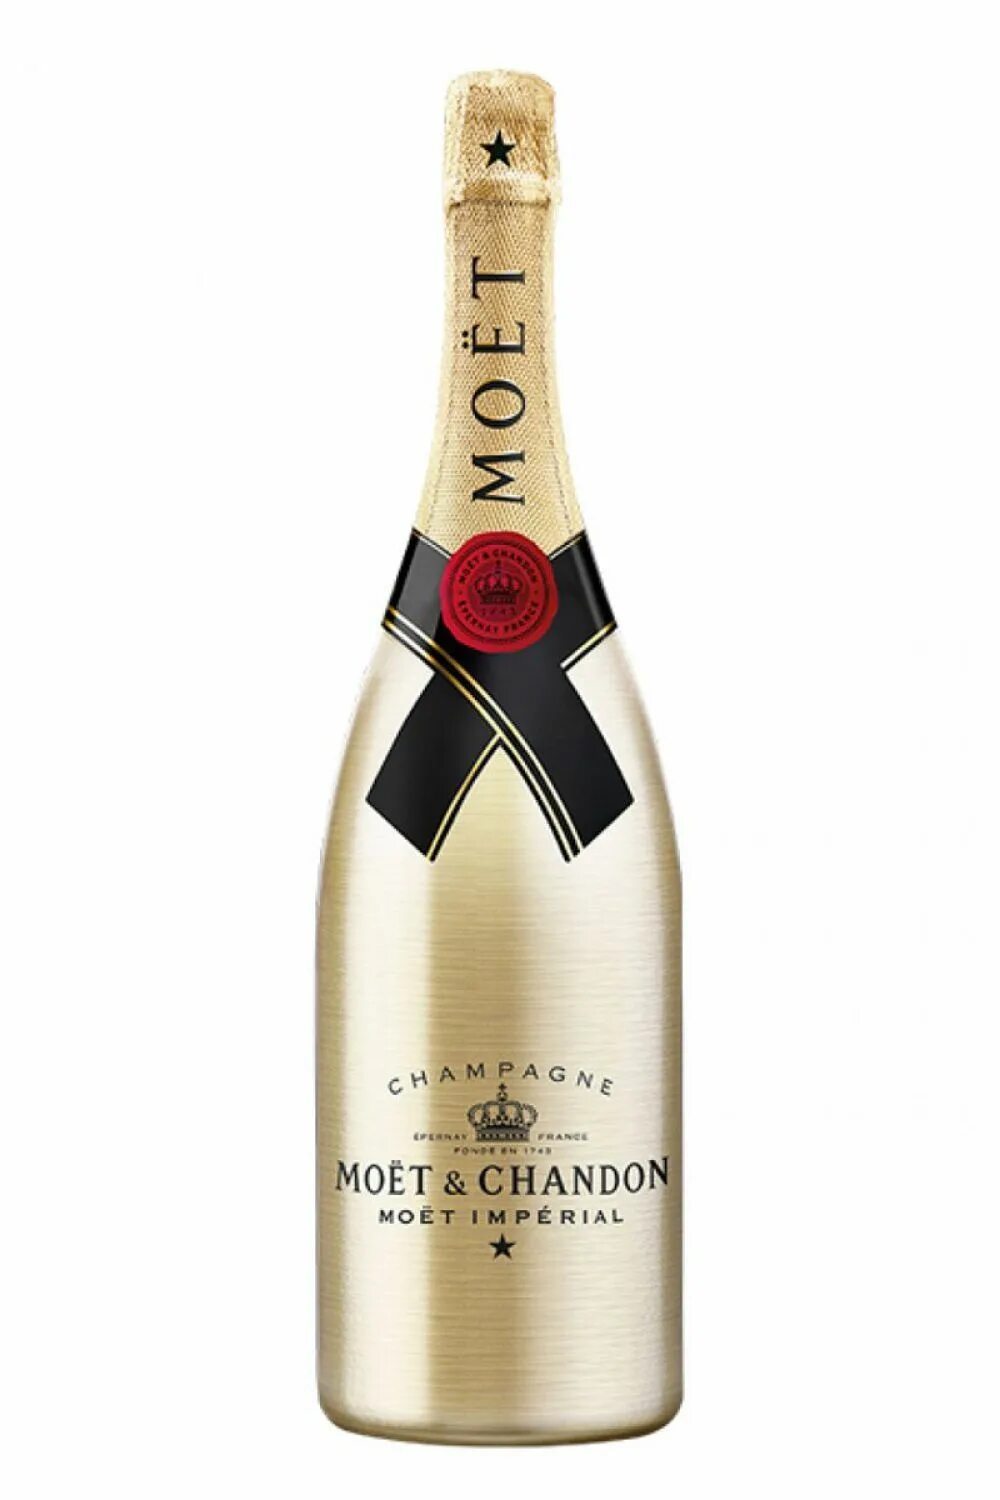 Moet Chandon Gold Imperial. Moet & Chandon Brut 70 CL + 2 Gold Glasses. Шампанское moet & Chandon Ice Imperial 0,75 л. Бутылка Оскар. Вино оскар